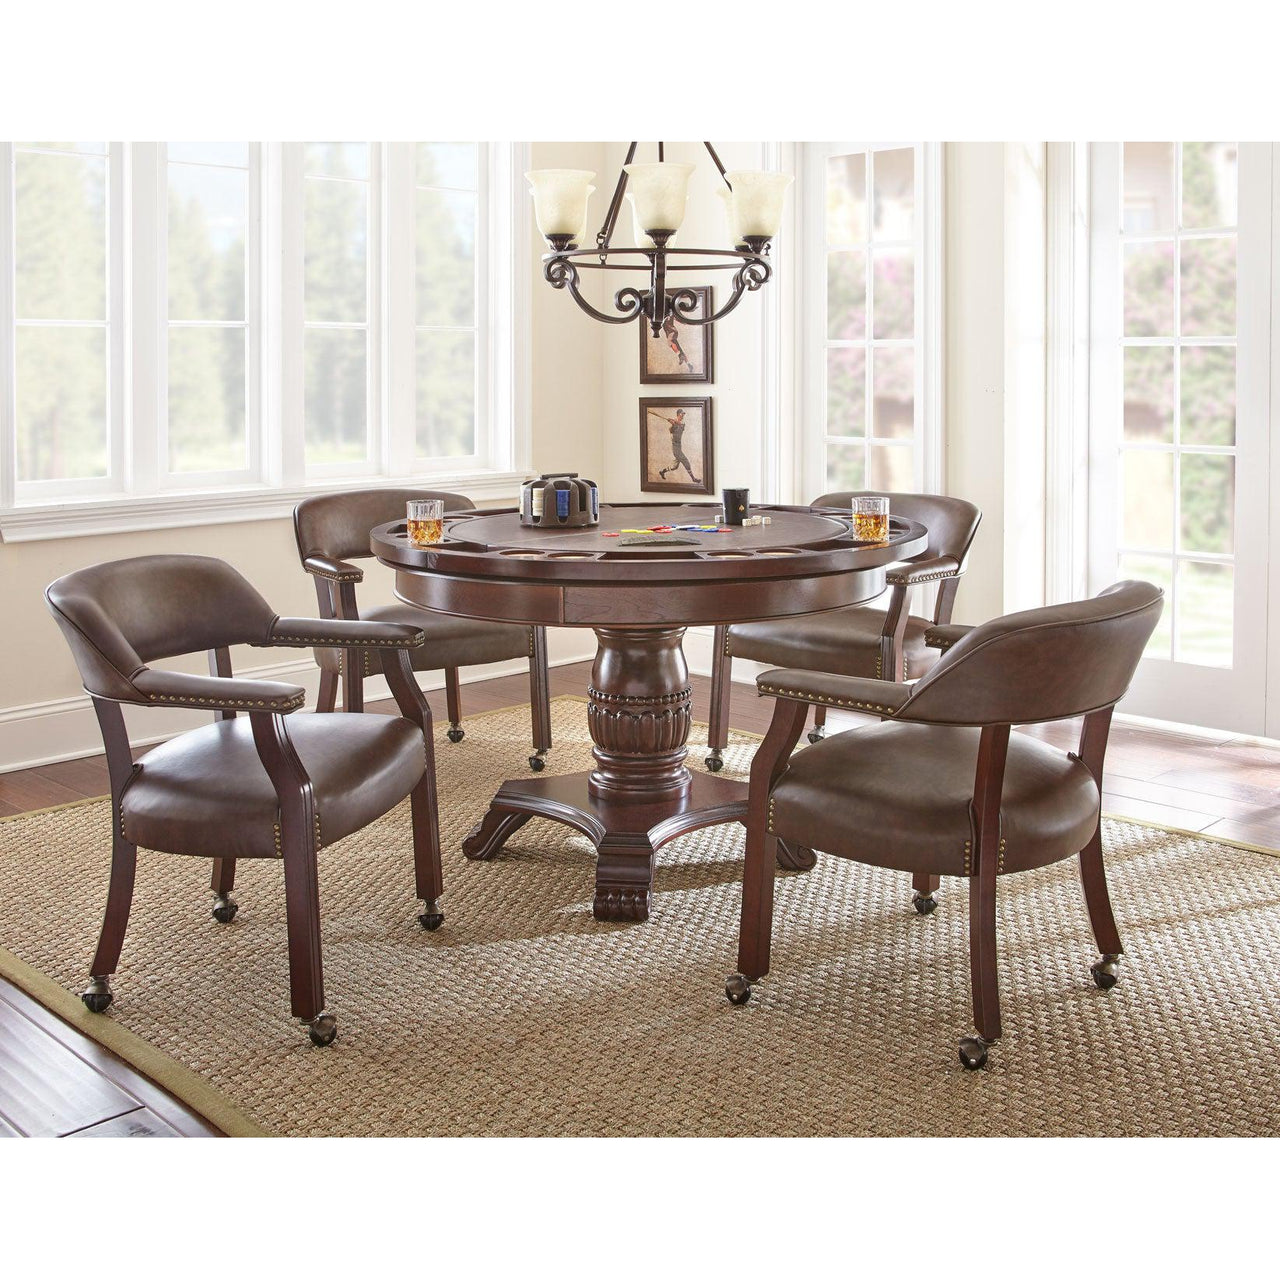 Convertible Poker Table Set Tournament in Brown with matching Chairs-AMERICANA-POKER-TABLES